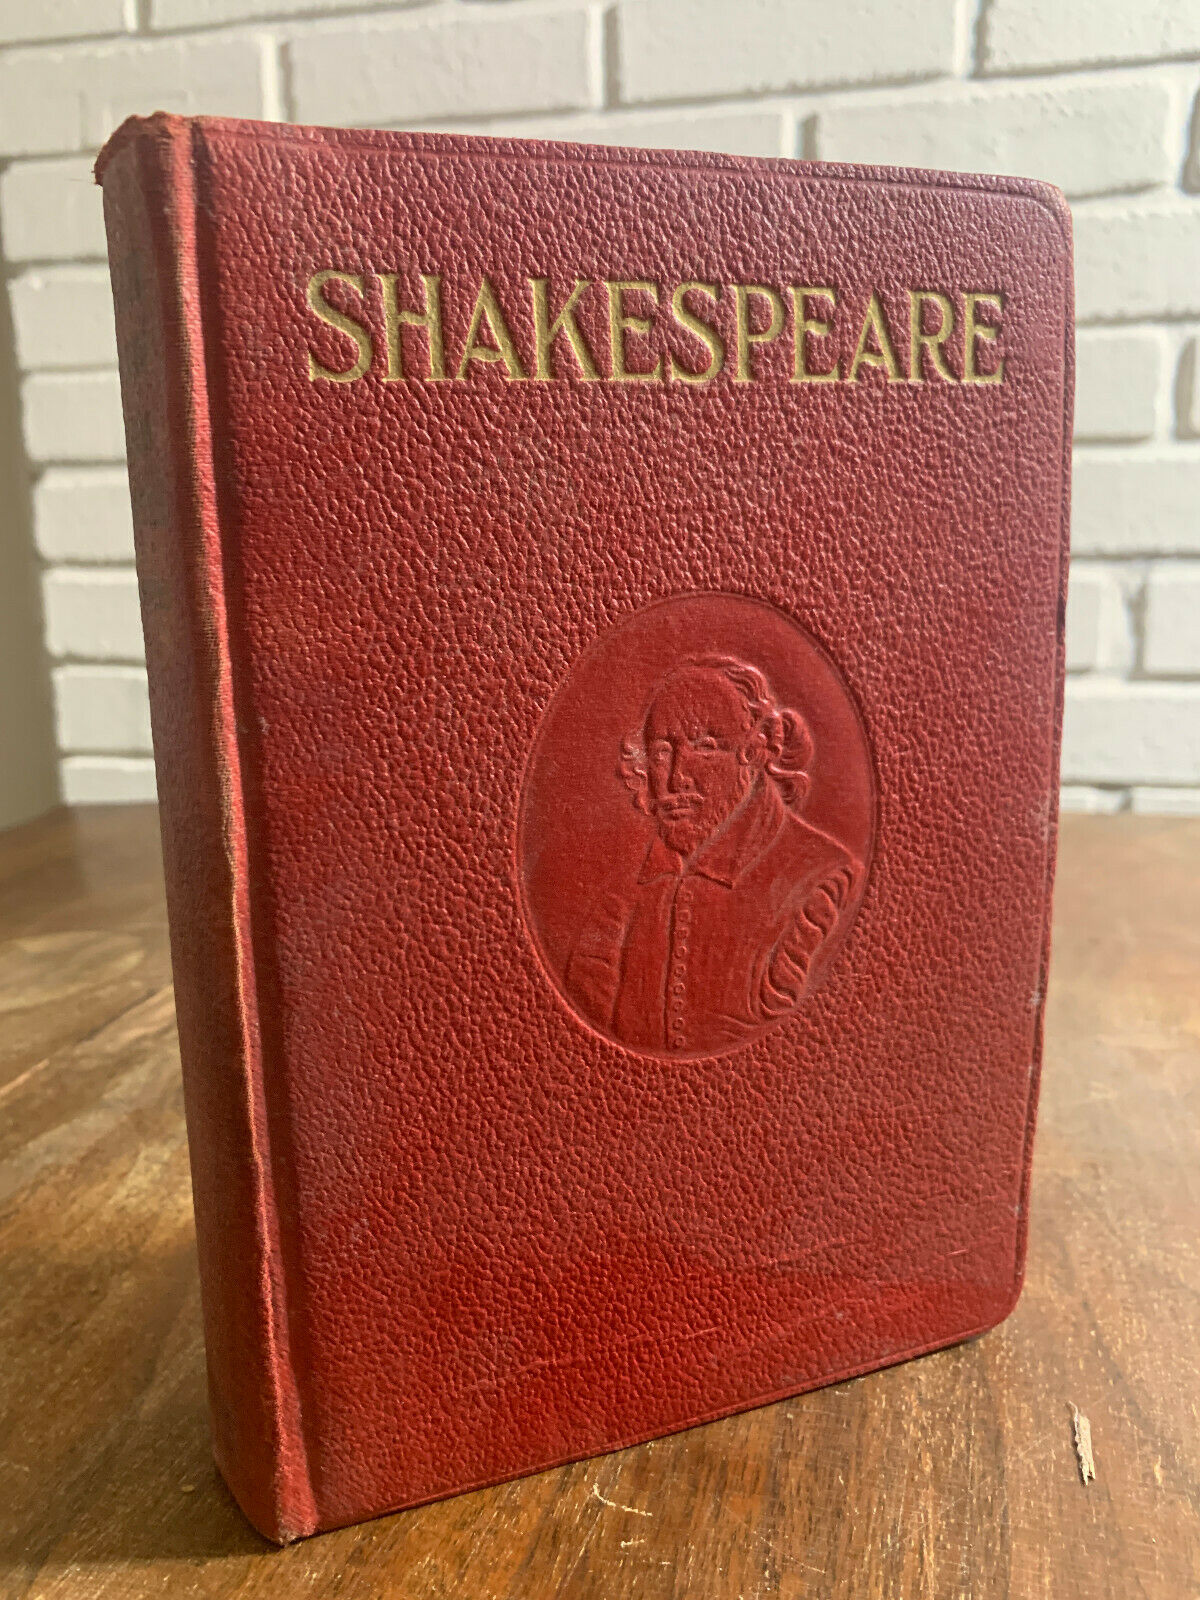 Shakespeare Complete Works w/ Notes by Israel Gollancz (Z1)